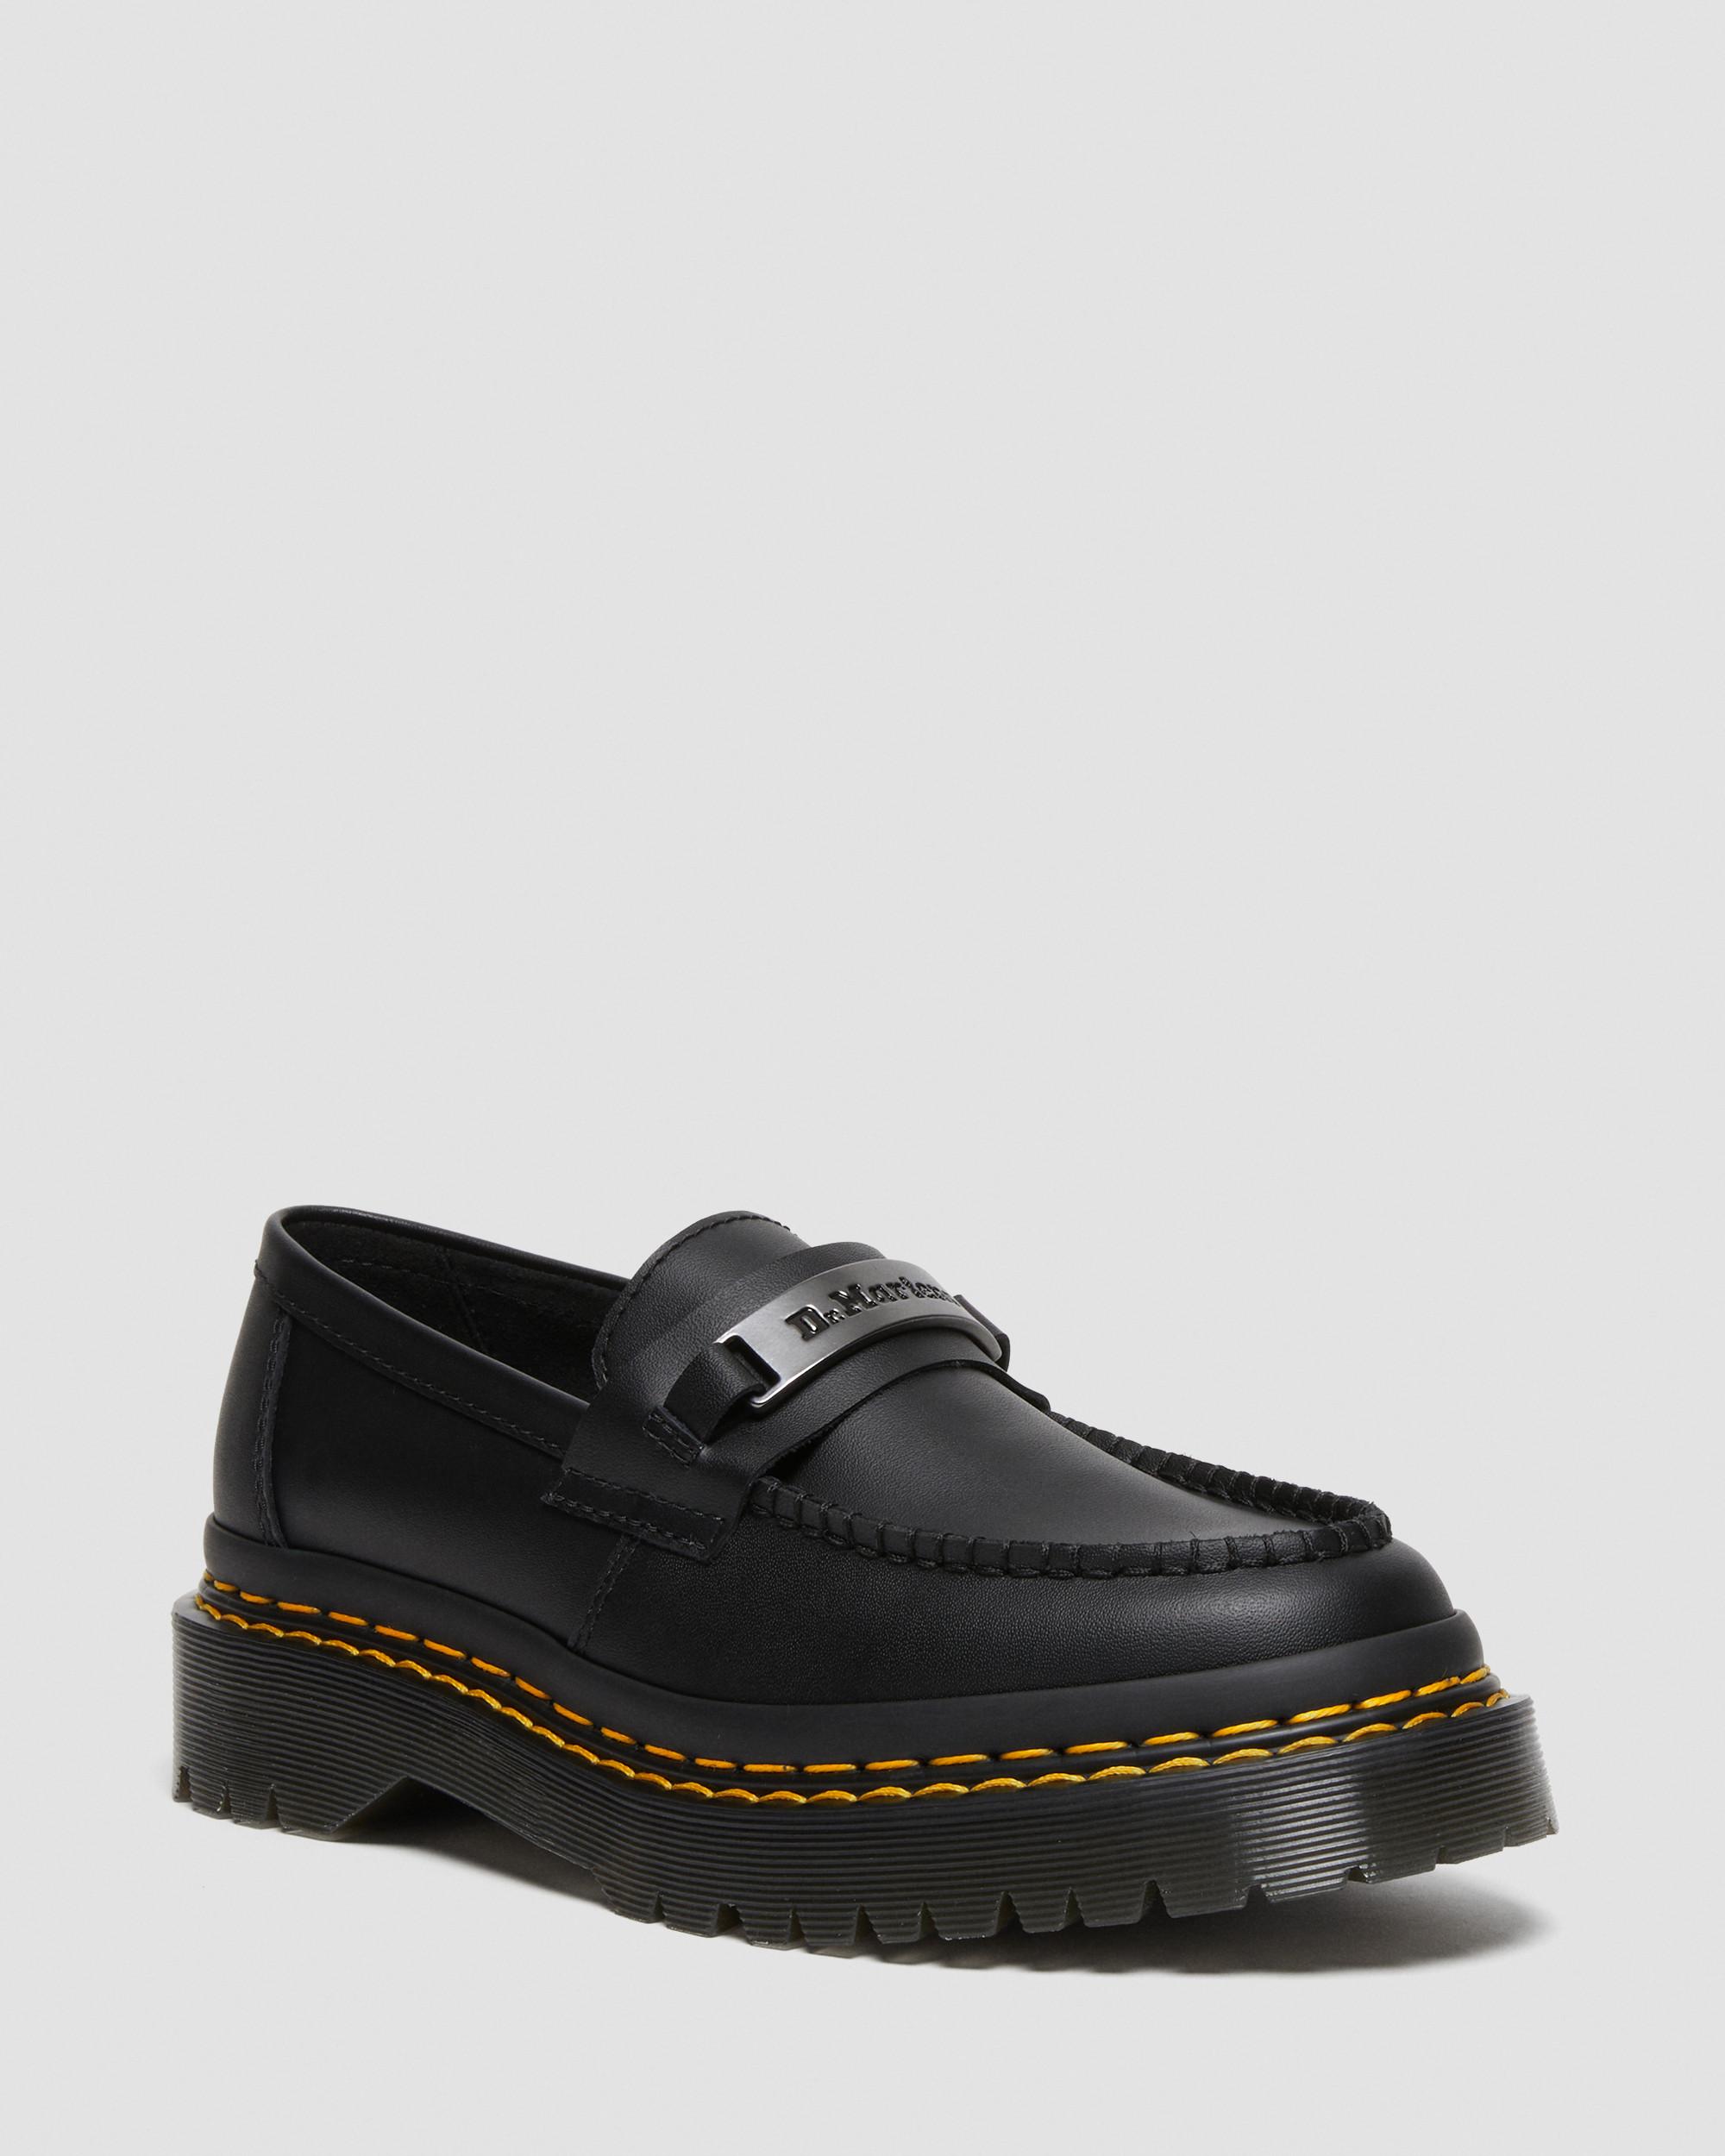 Penton Bex Double Stitch Leather Loafers | Dr. Martens